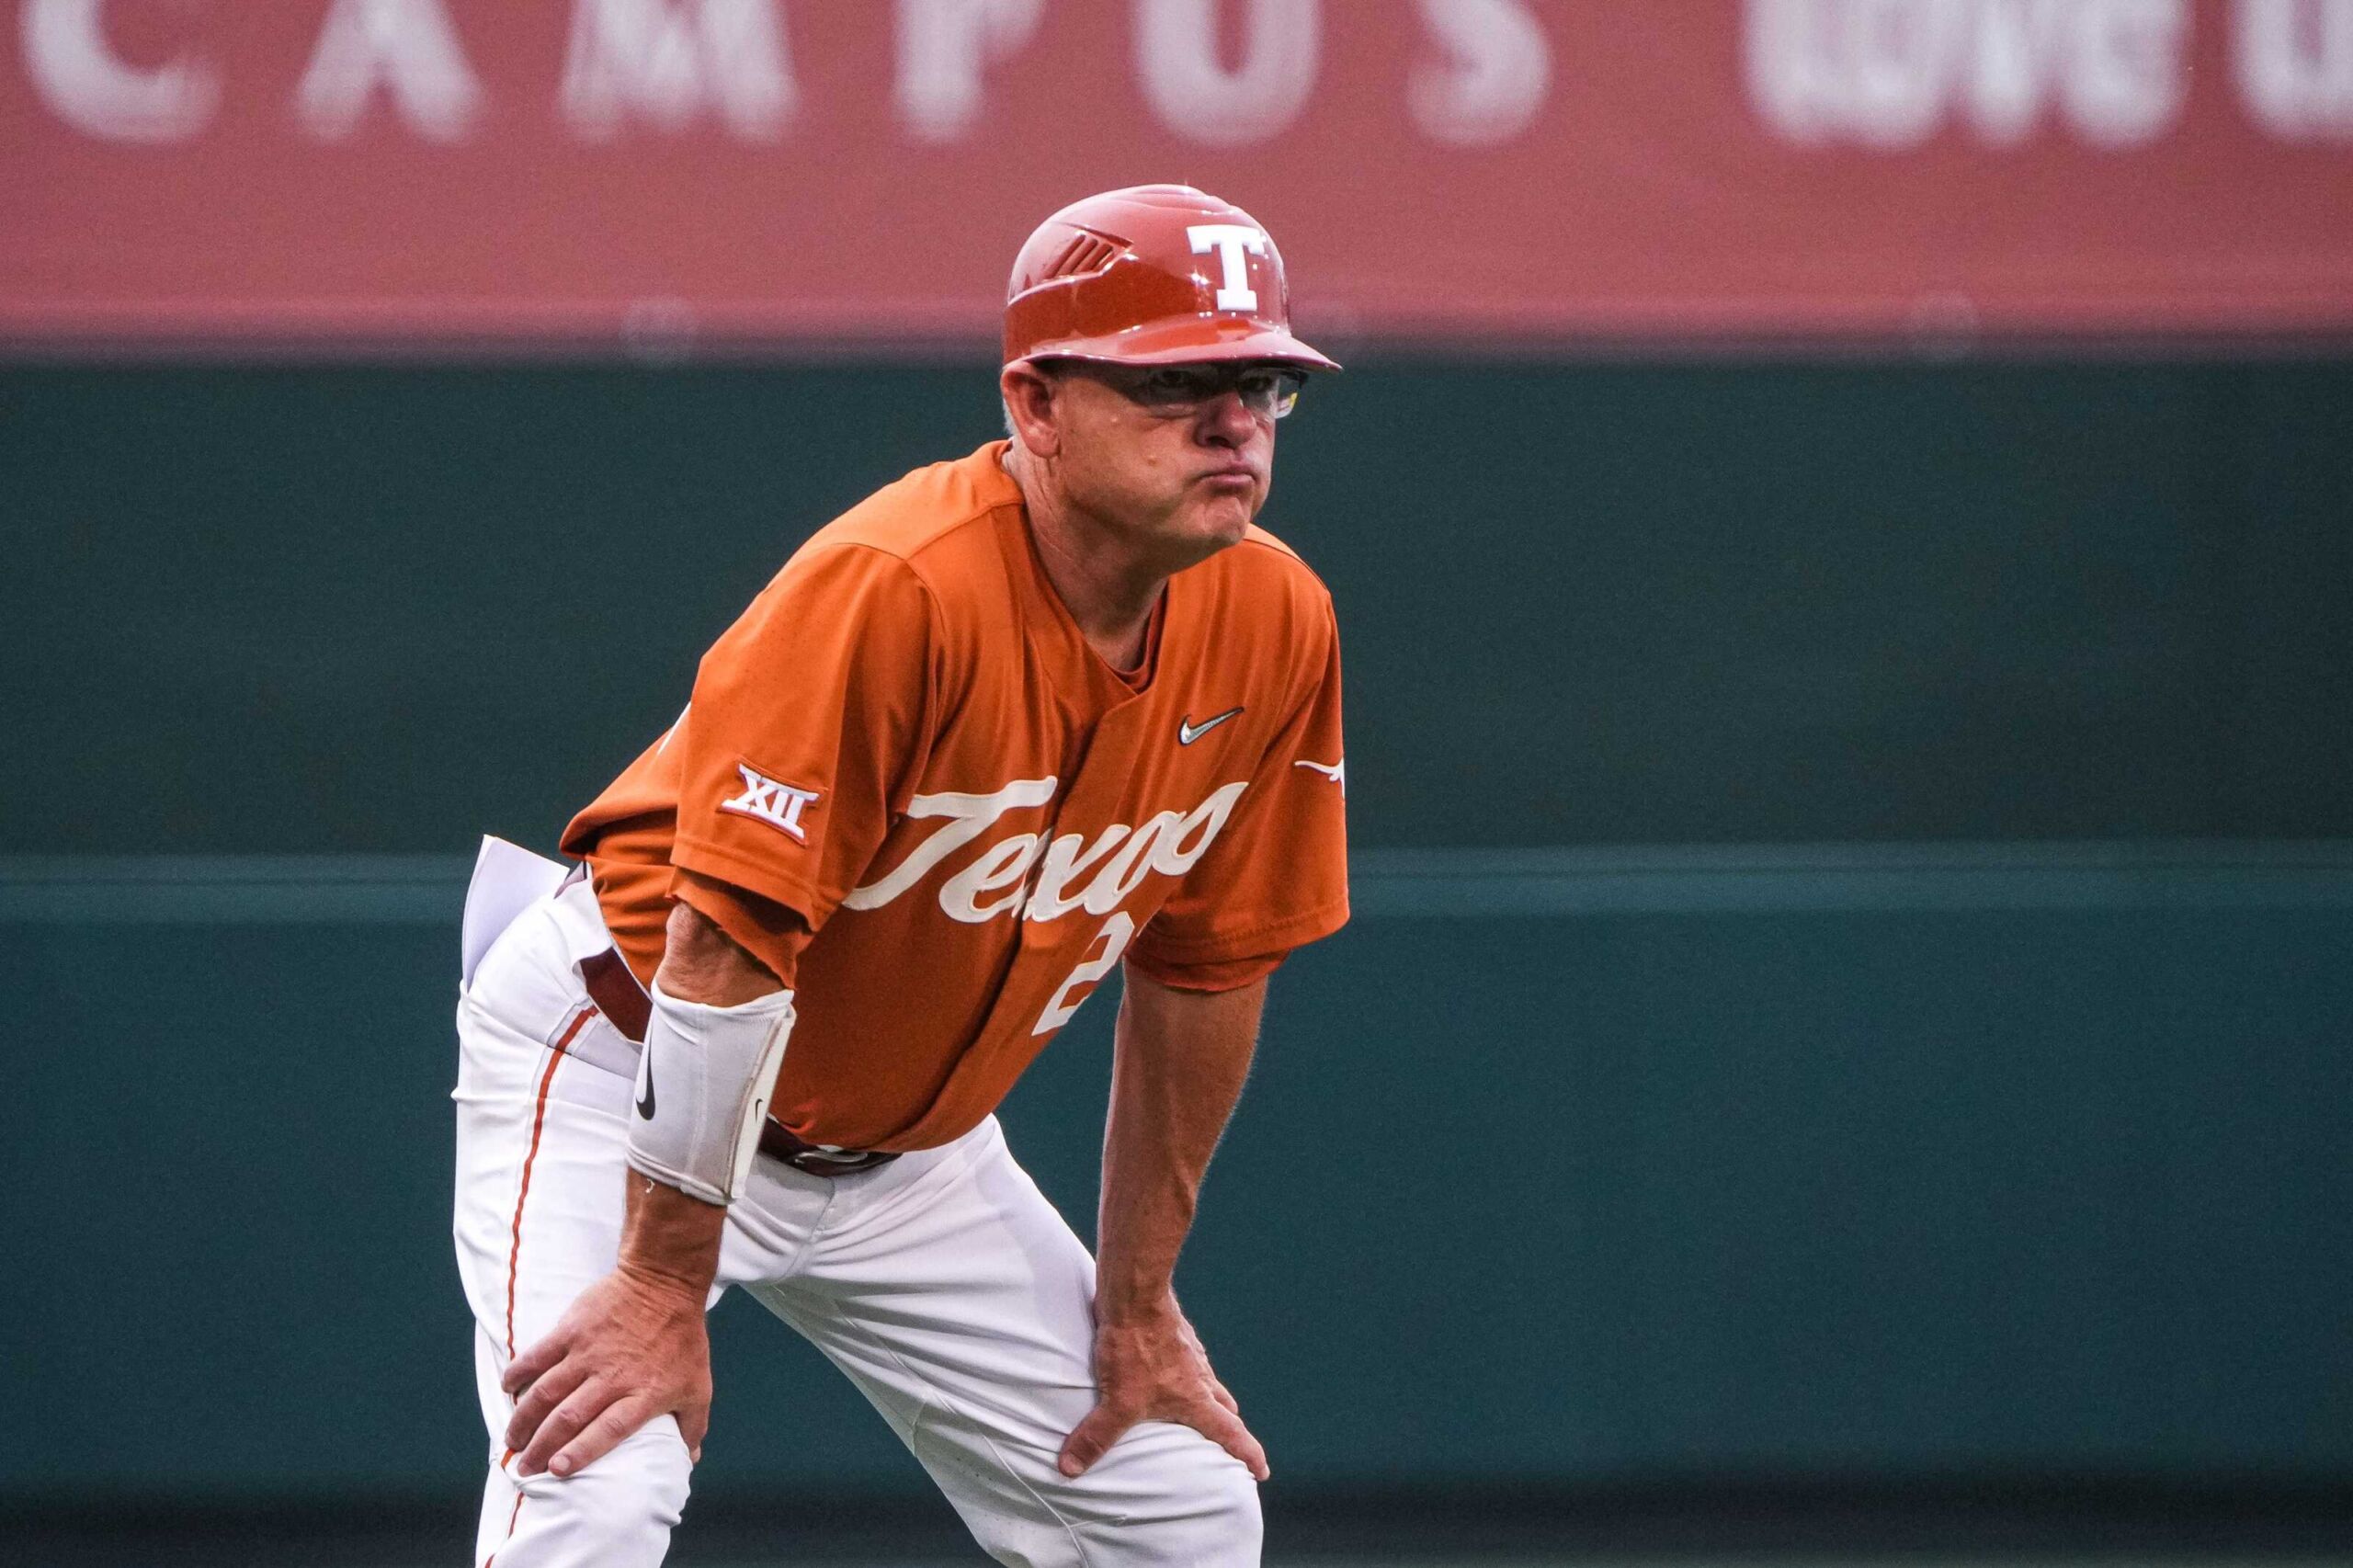 Texas baseball vs. WVU: How to watch the Longhorns on TV this week